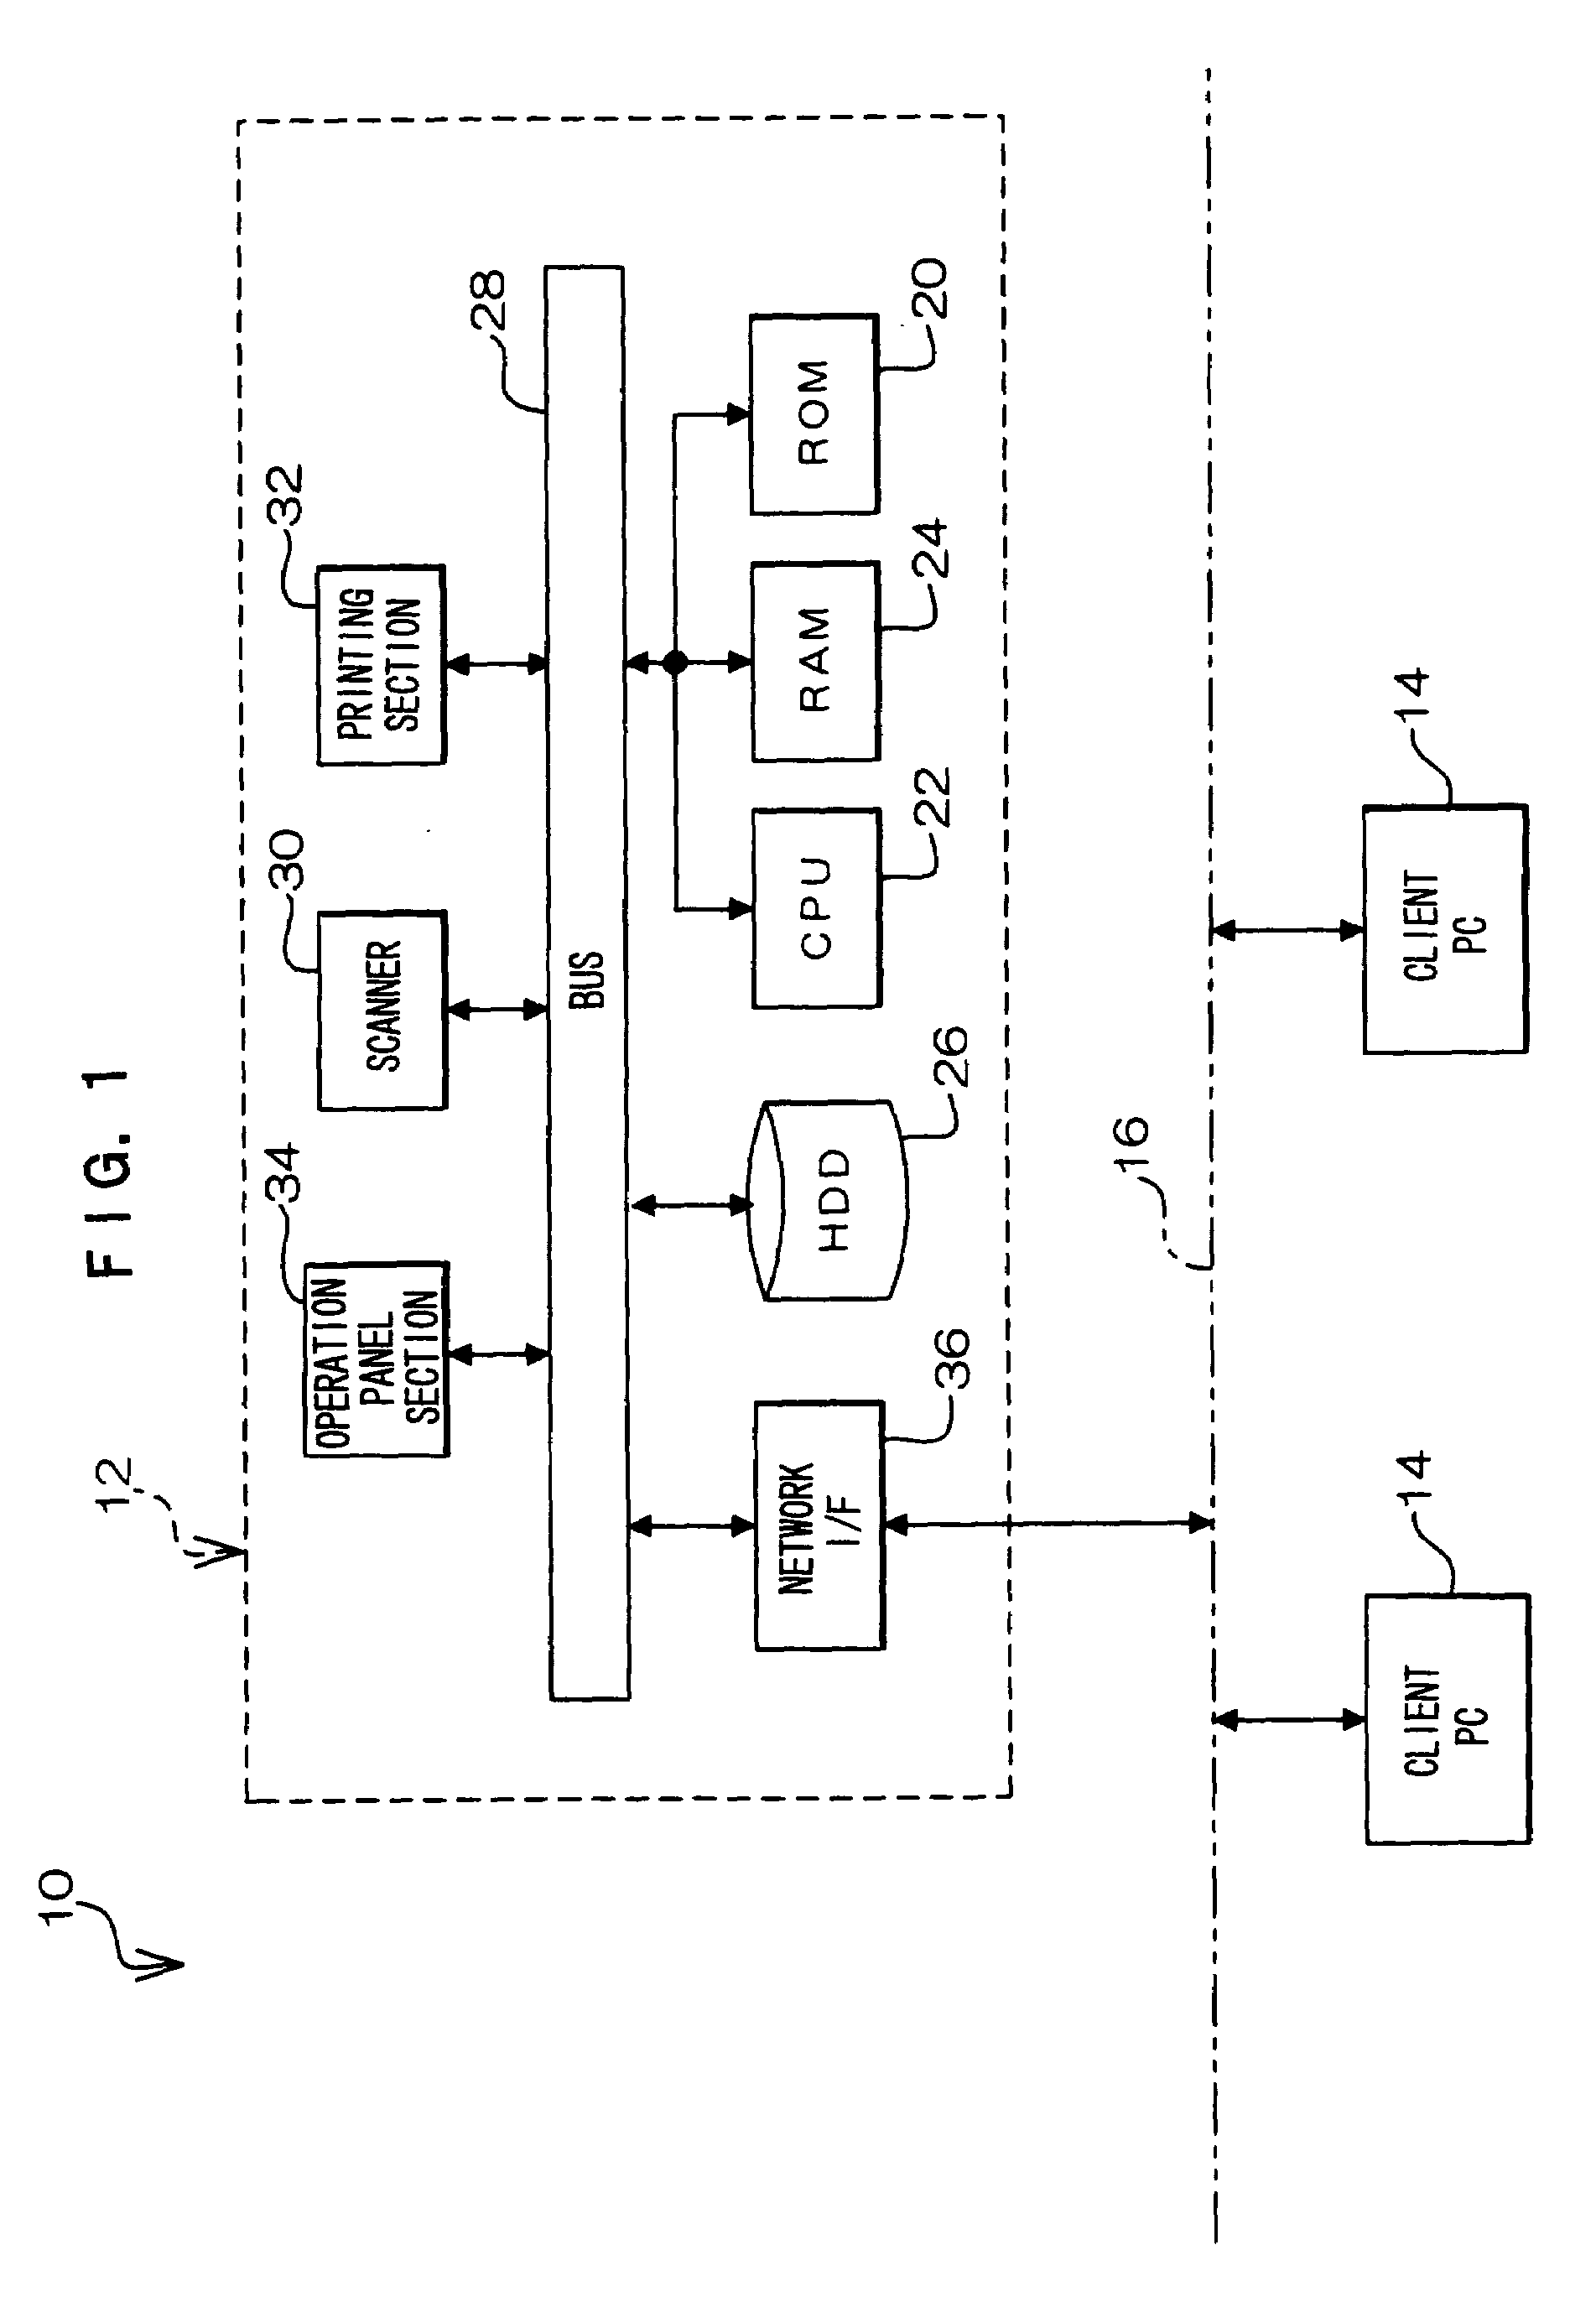 Image processing device and an image processing method for curbing the amount of color material consumed and suppressing a deterioration in image quality